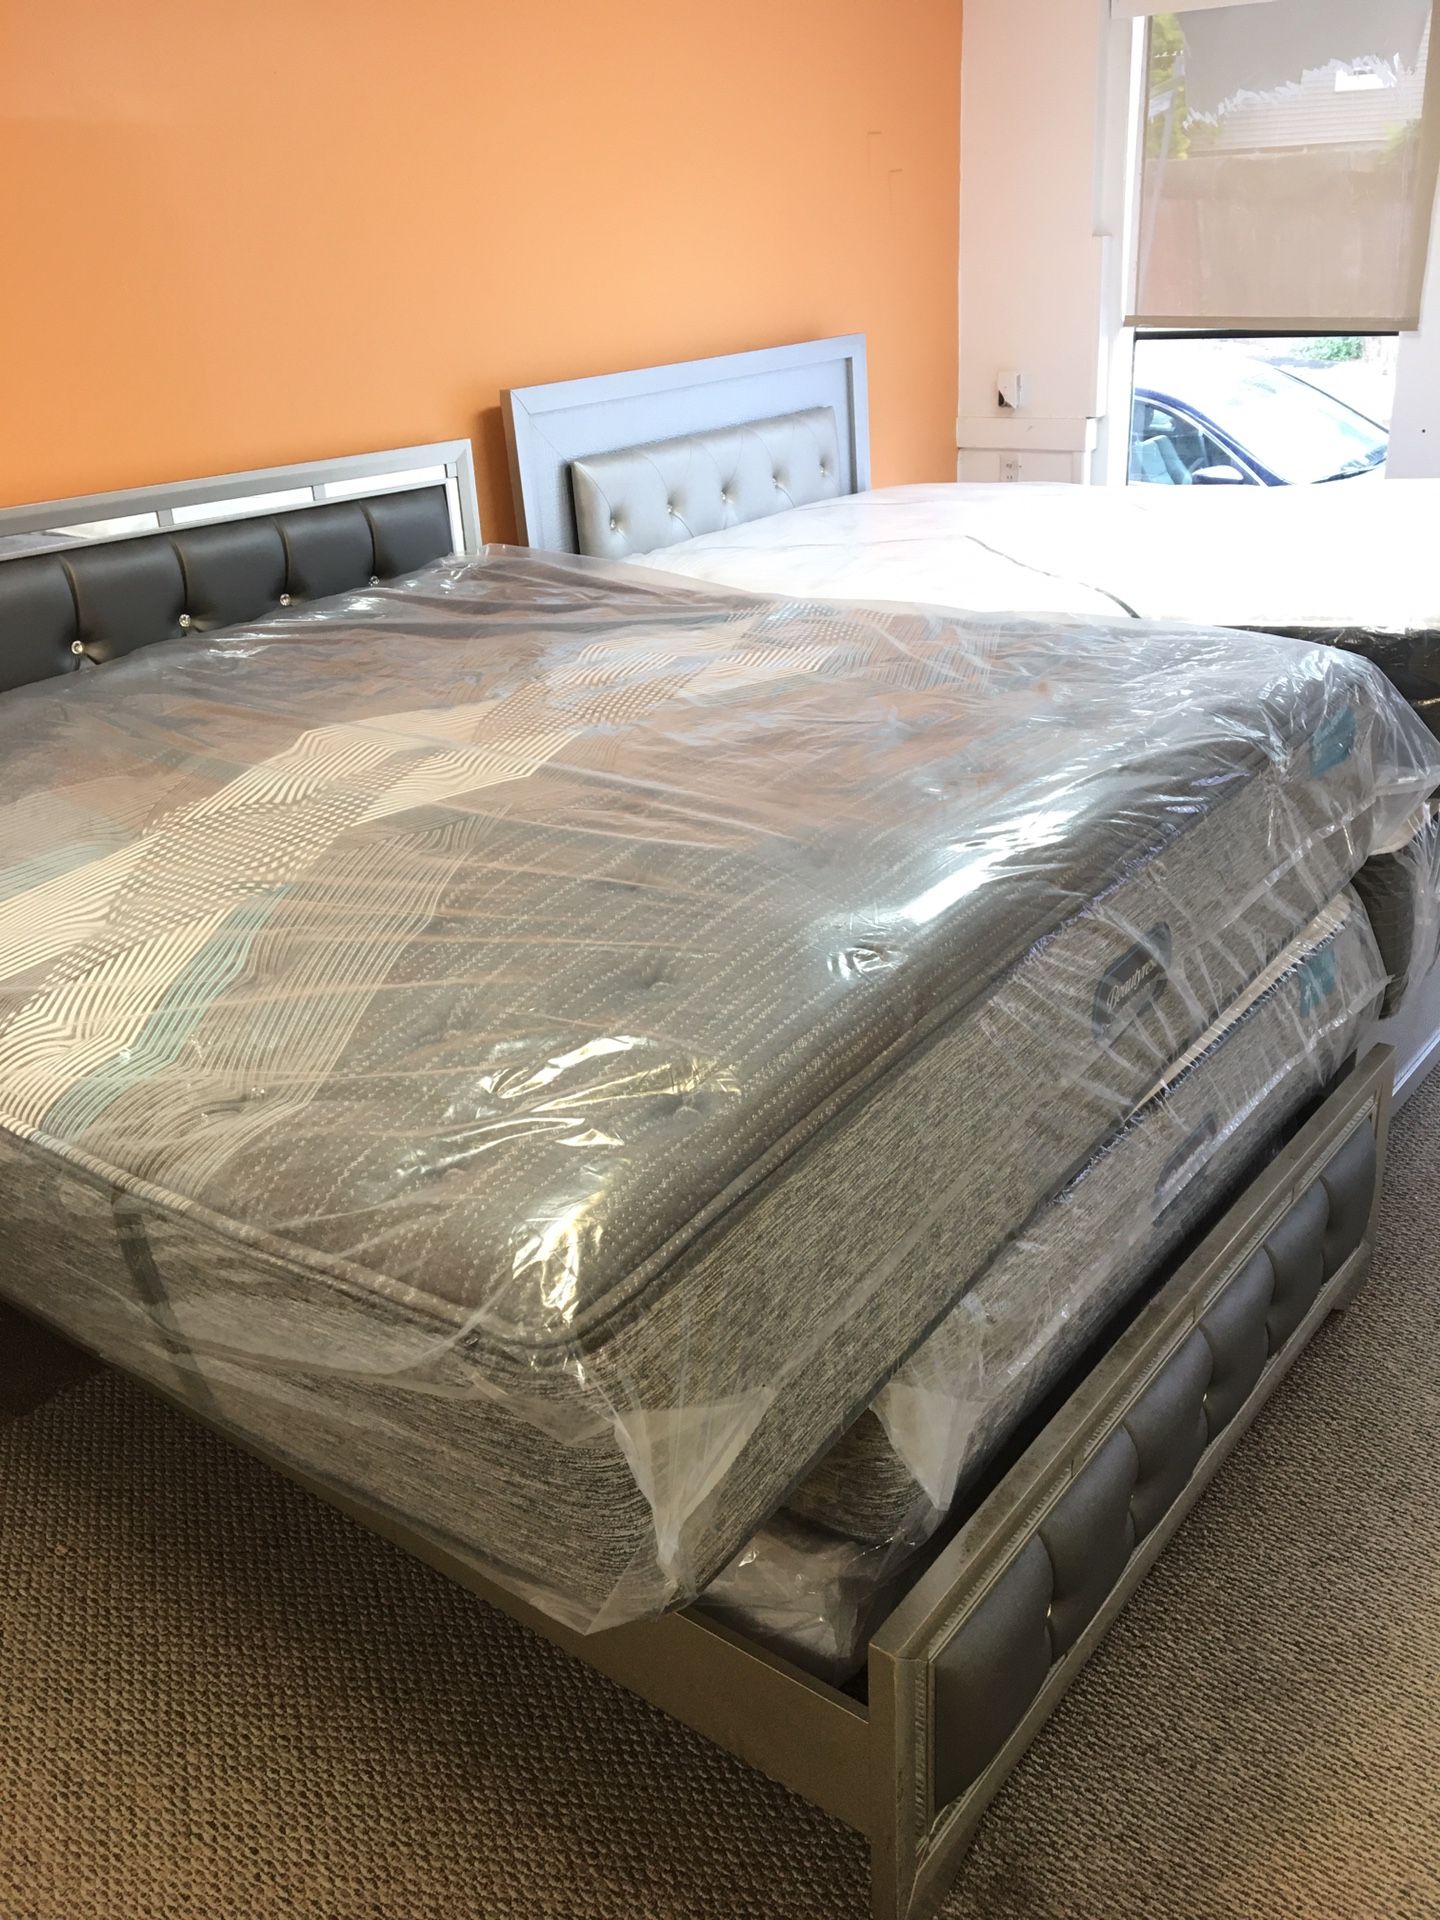 🚚 MATTRESS SALE BRAND NEW STARTING FROM $99 AVAILABLE DELIVERY 🚚 SAME DAY STORE LOCATION.303 POCASSET AVE PROVIDENCE RI 